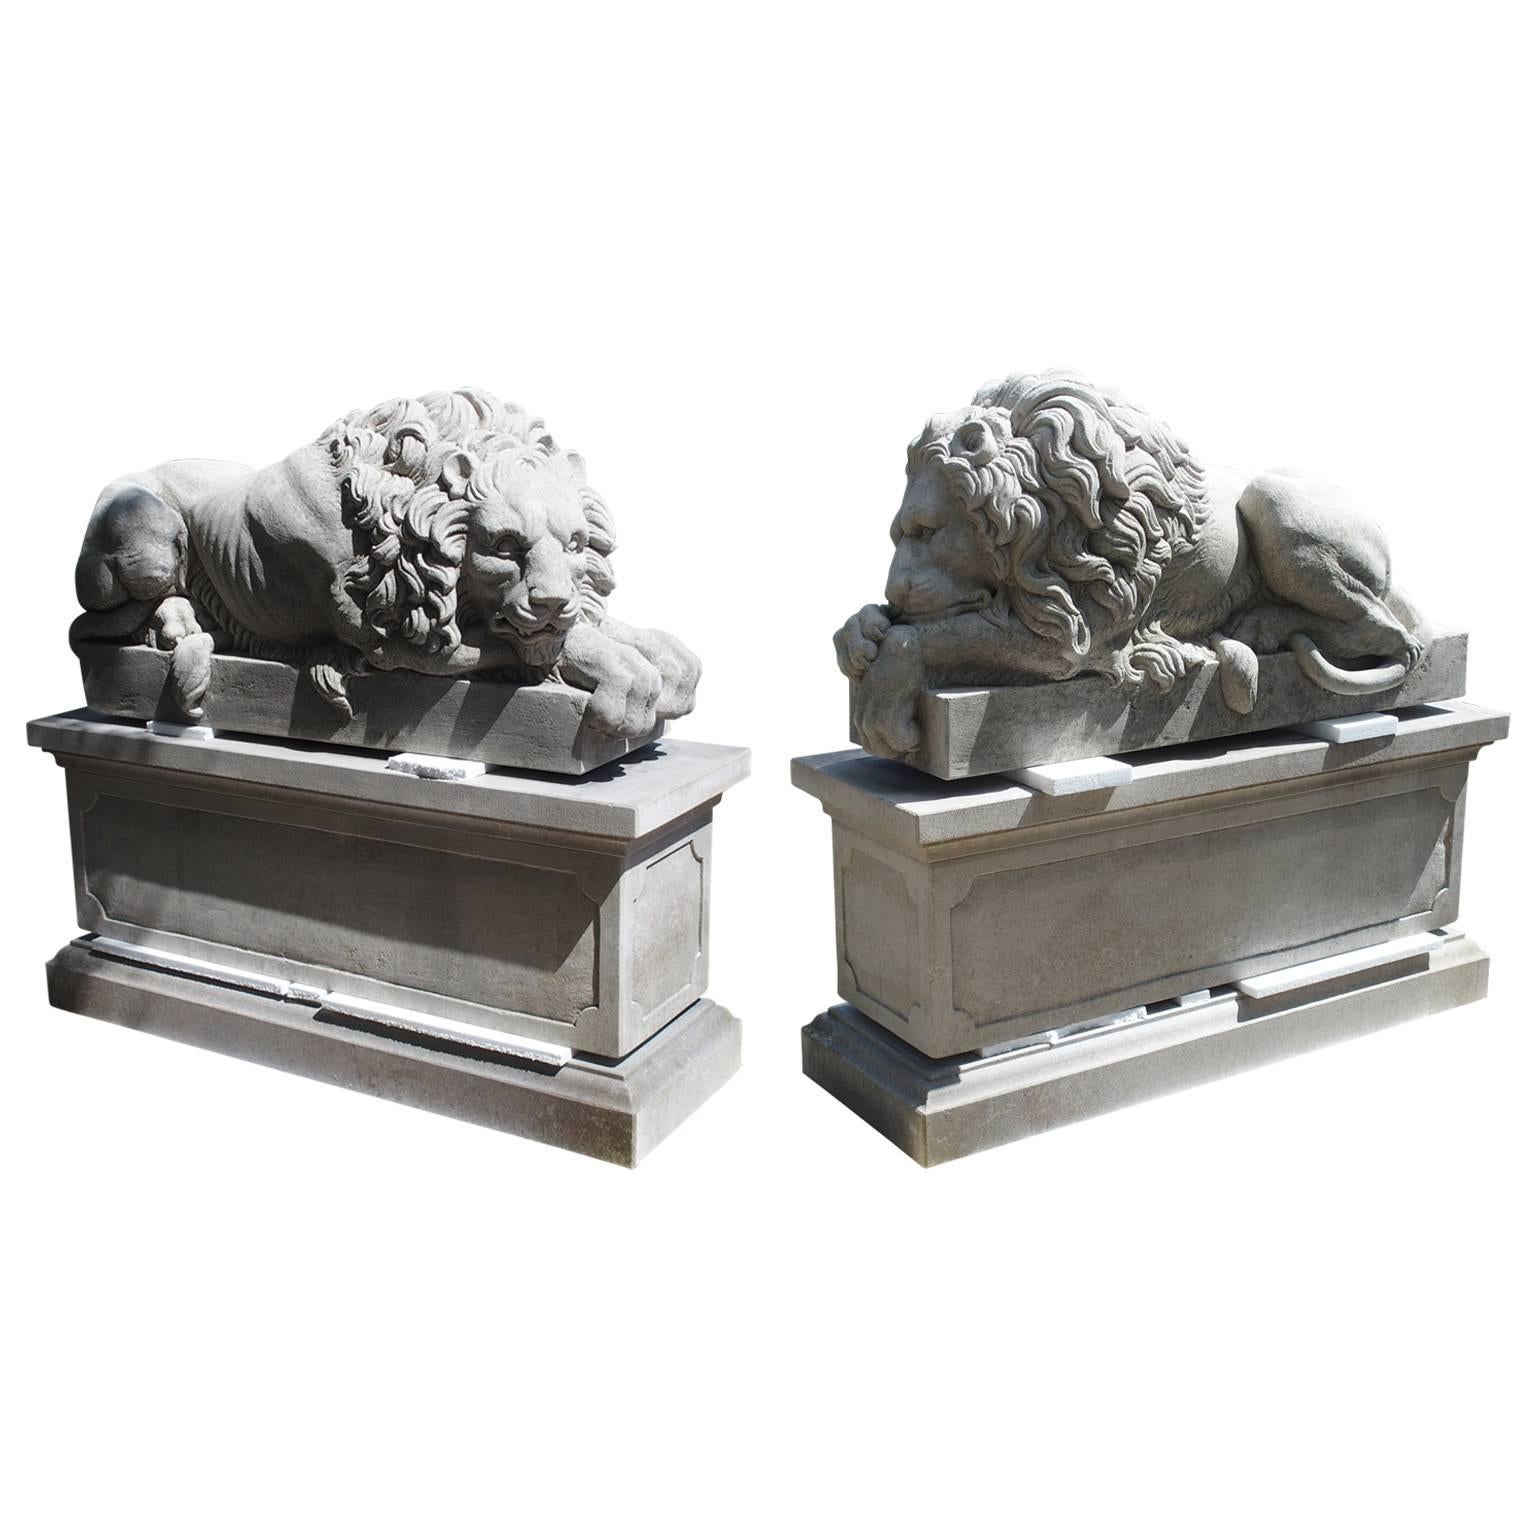 Pair of Large Carved Stone Lions on Pedestals, "The Sleeping and The Vigilant"